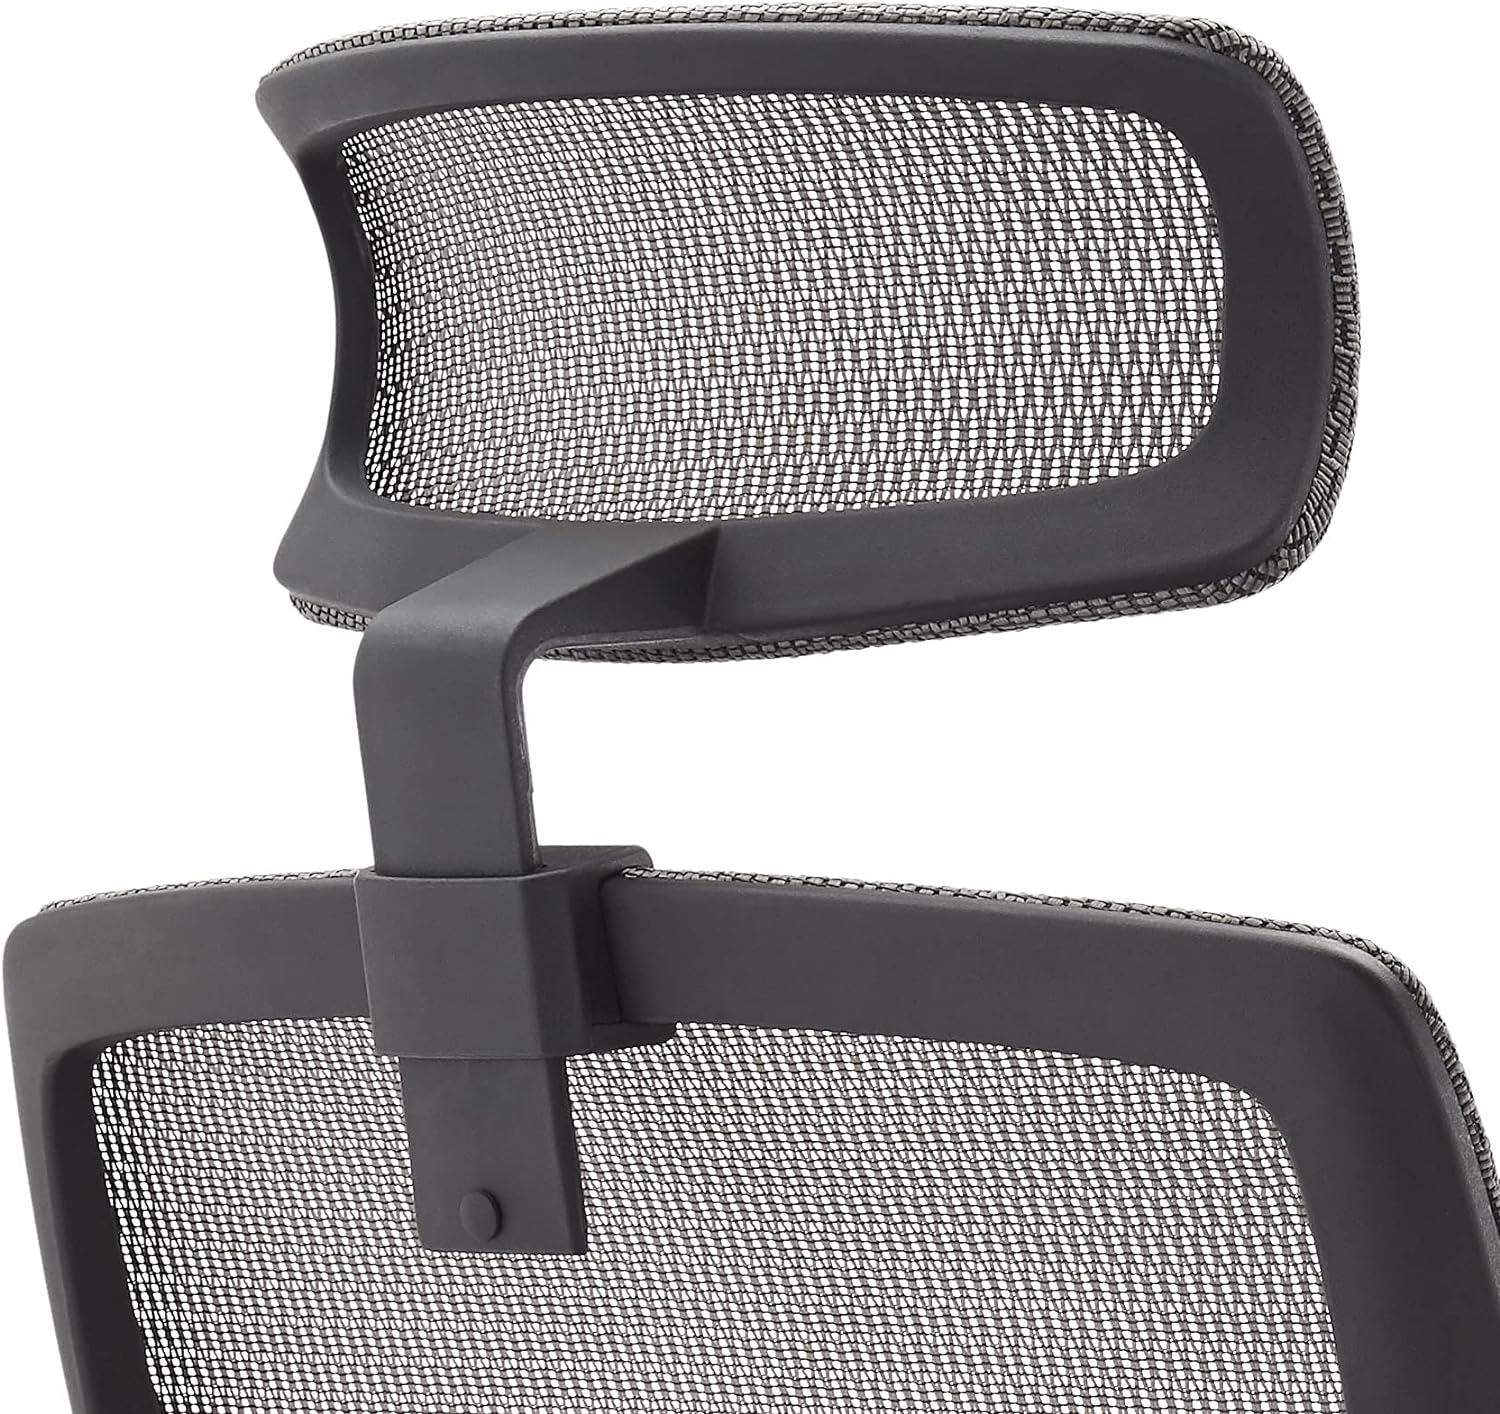 Amazon Basics Ergonomic Adjustable High-Back Chair with Flip-Up Arms and Headrest, Contoured Mesh Seat - Grey, 25.5D x 26.25W x 45.5H